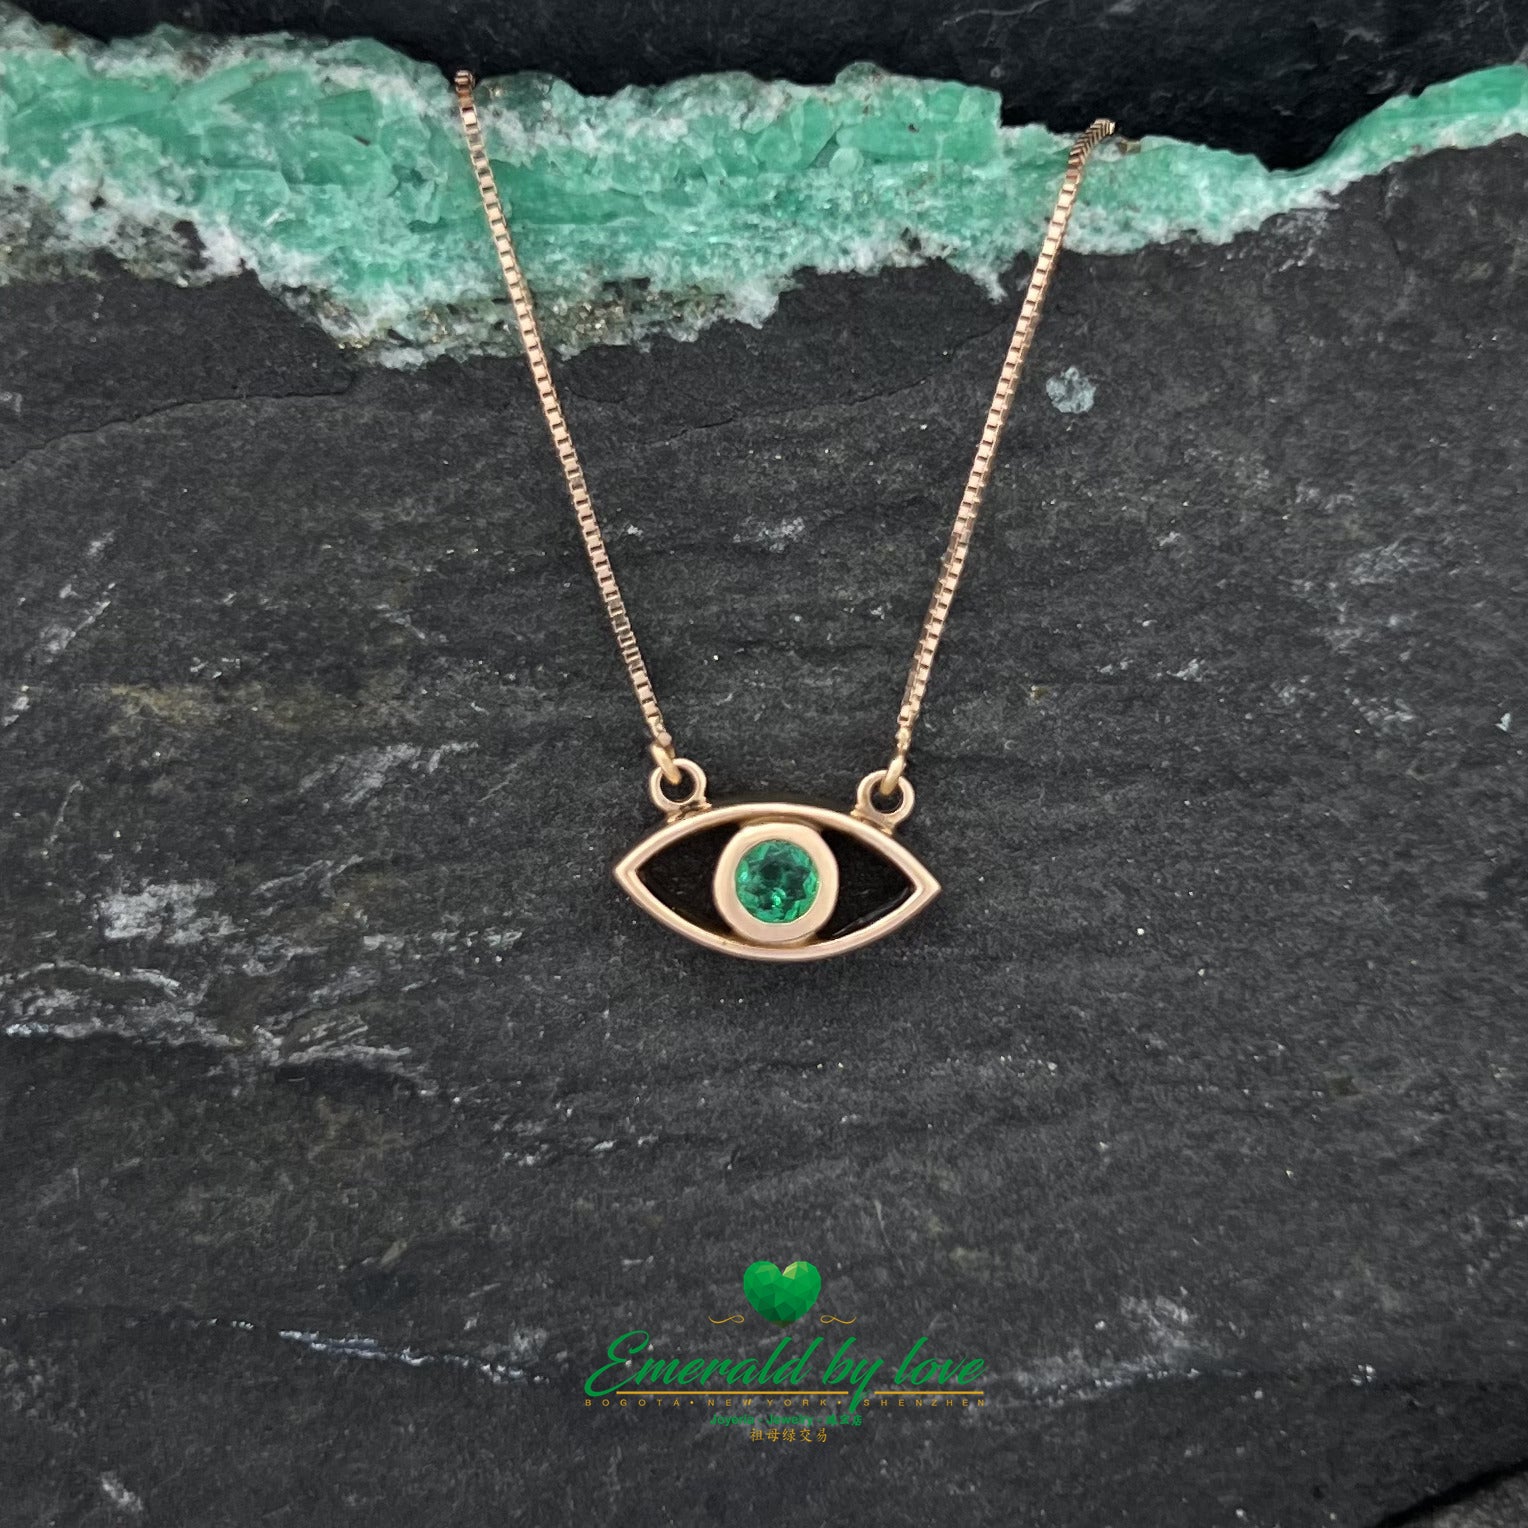 Roseate Vision: Rose Gold Eye Pendant with Round Emerald Center